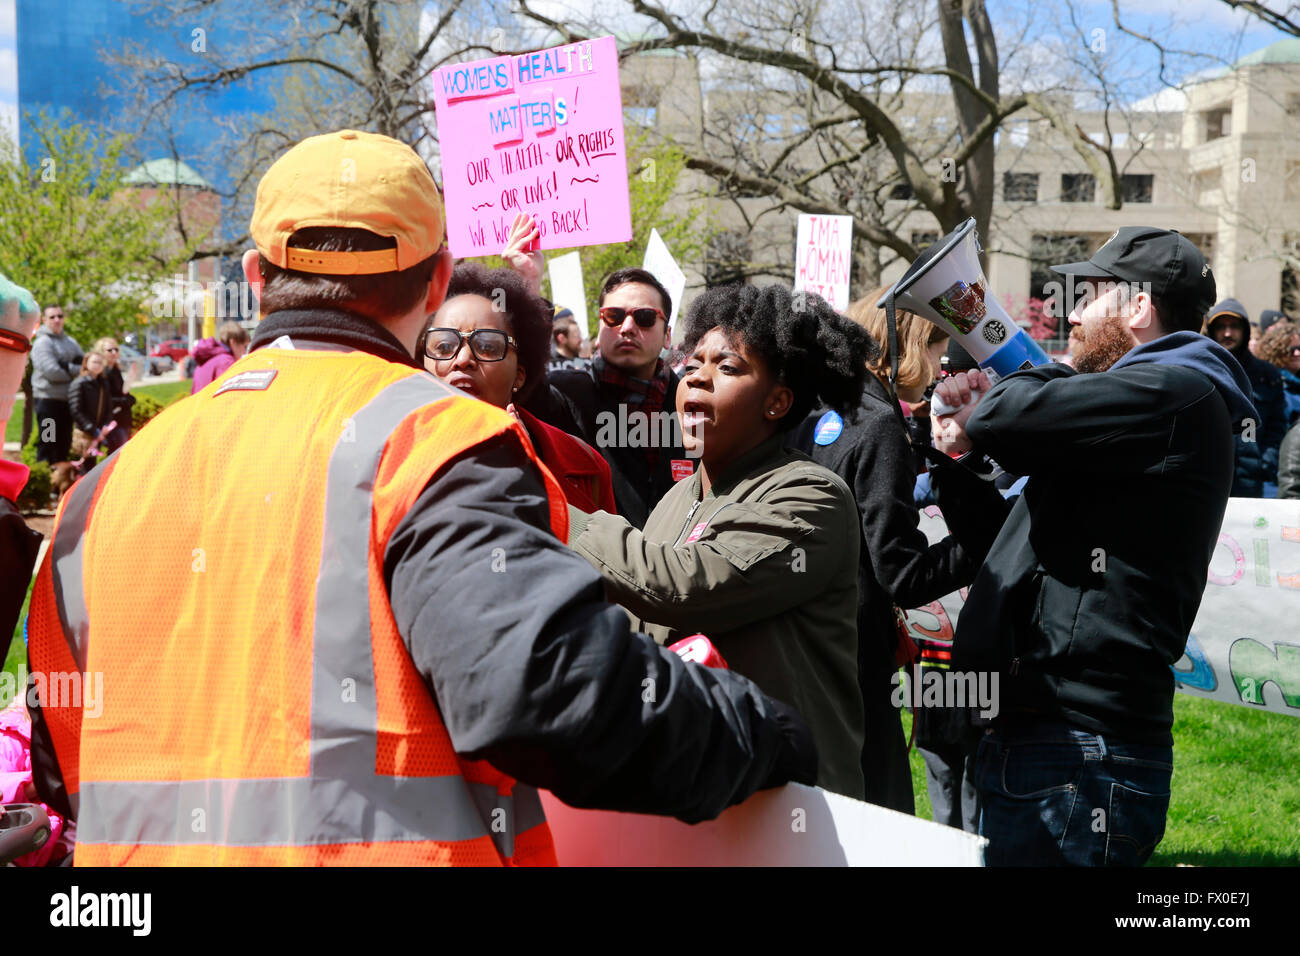 Indianapolis, Indiana, USA. 9th Apr, 2016. About 2000 protesters participate in the Rally for Women's Rights on the south lawn of the Indiana Statehouse, April 9, 2016 in Indianapolis, Ind.  The protest was a response to Indiana's newly passed abortion law House Bill 1337 signed into law by Indiana Governor Mike Pence on March 24, 2016. The Indiana law prohibits abortion if the fetus may be born with a disability, and also restricts a woman from terminating her pregnancy solely because of the gender or race of the fetus. Two black lives matter women argue with a counter protester. Stock Photo